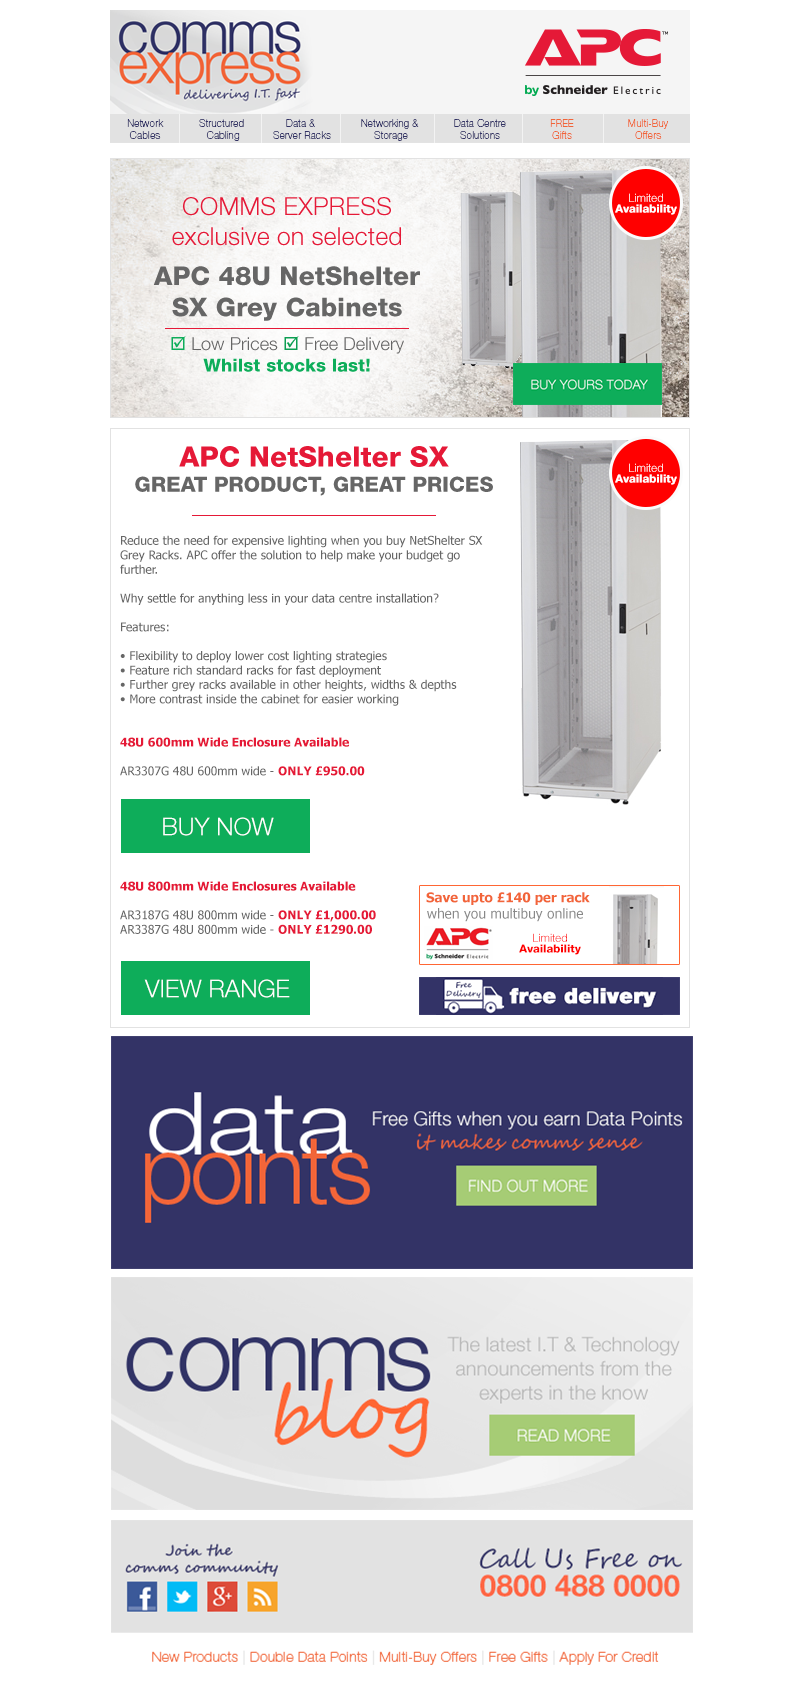 EXCLUSIVE LOW PRICES on APC NetShelter SX Cabinets